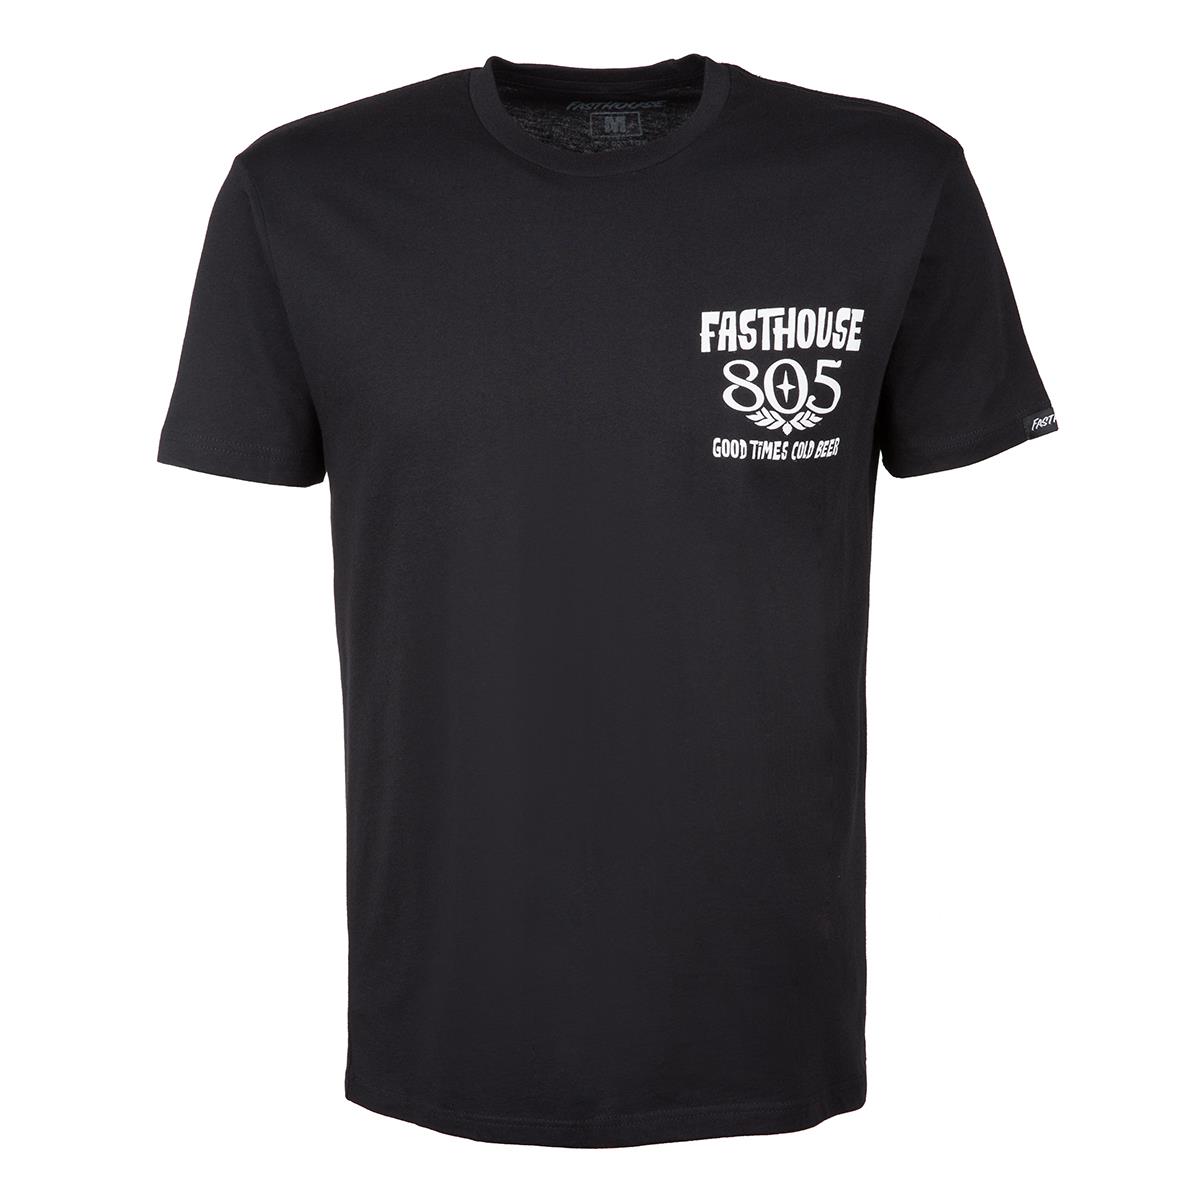 Fasthouse T-Shirt 805 Cold One Black